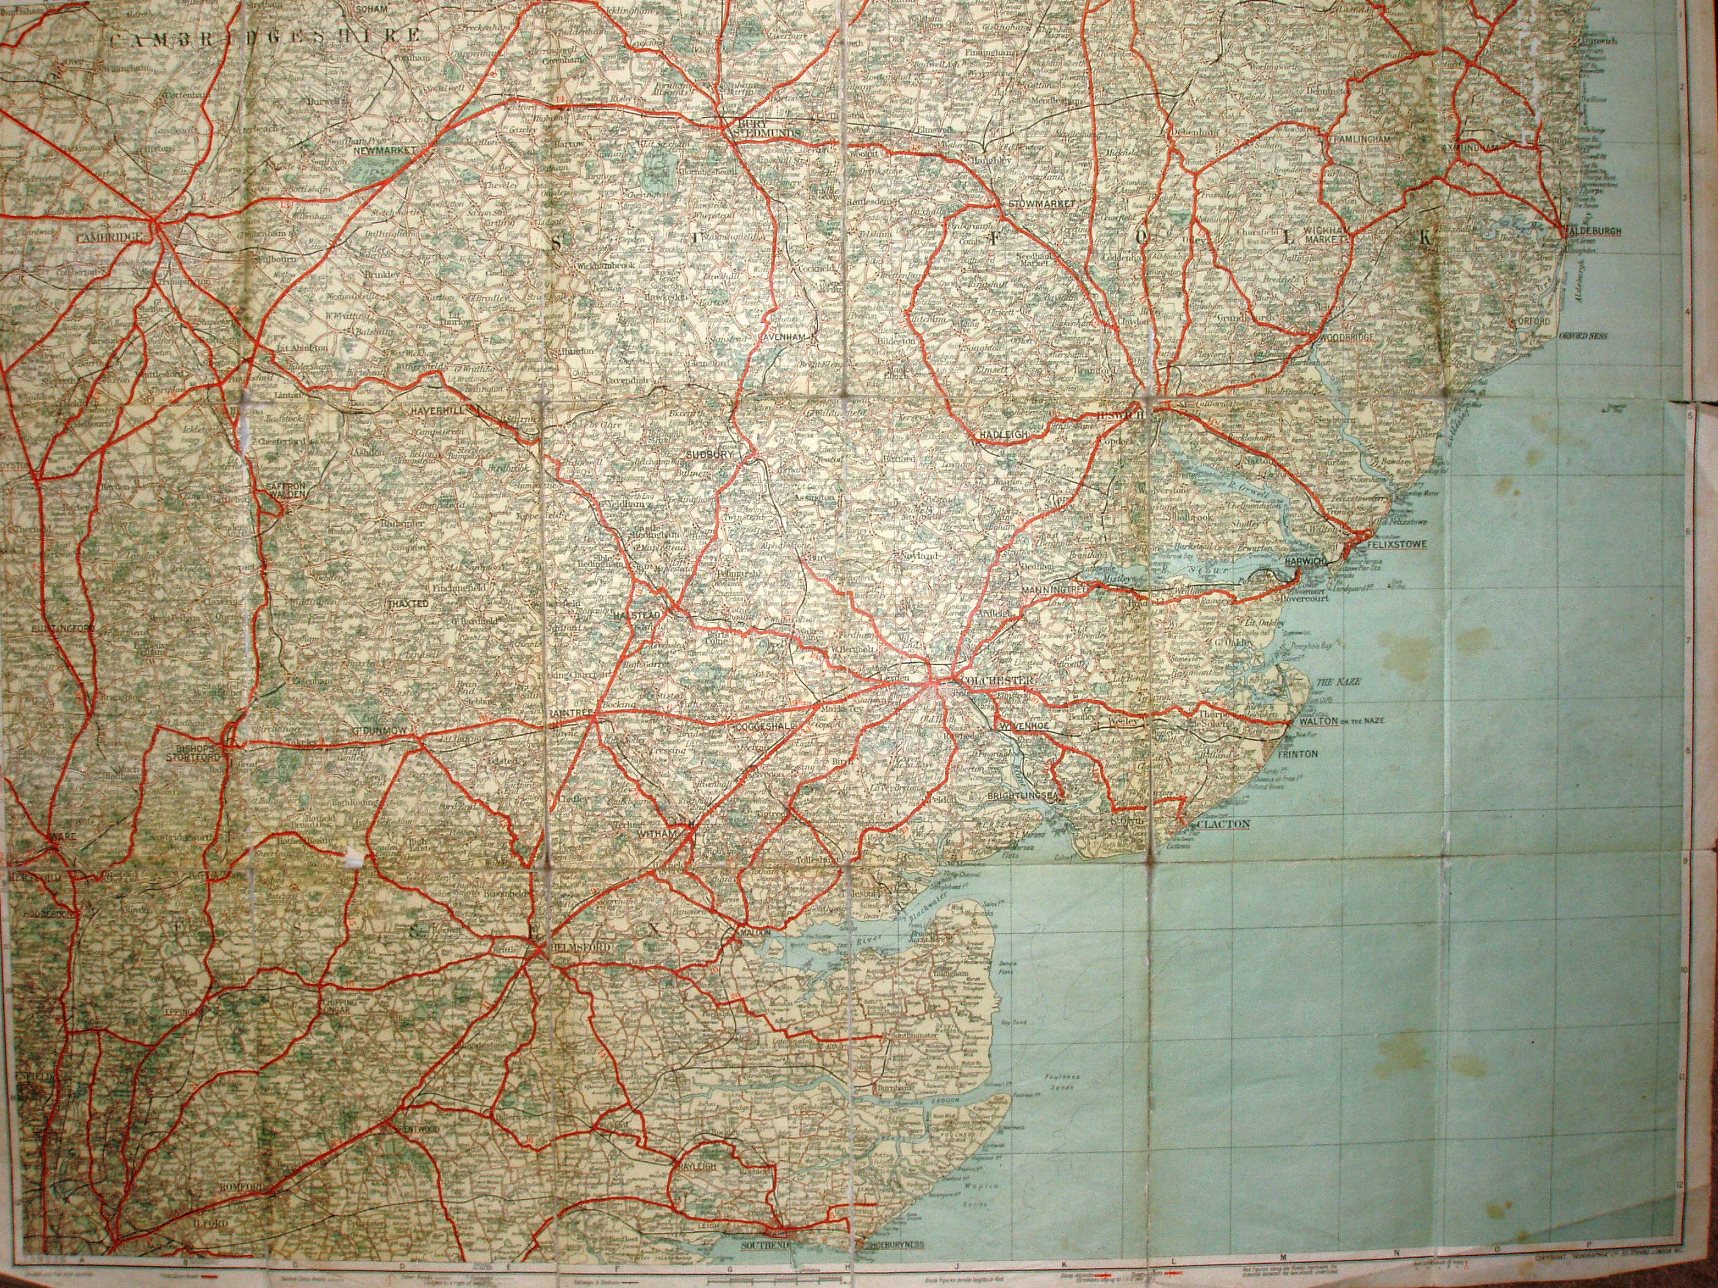 Geographia 2 Miles to the Inch Maps, Sheet 14, 1920